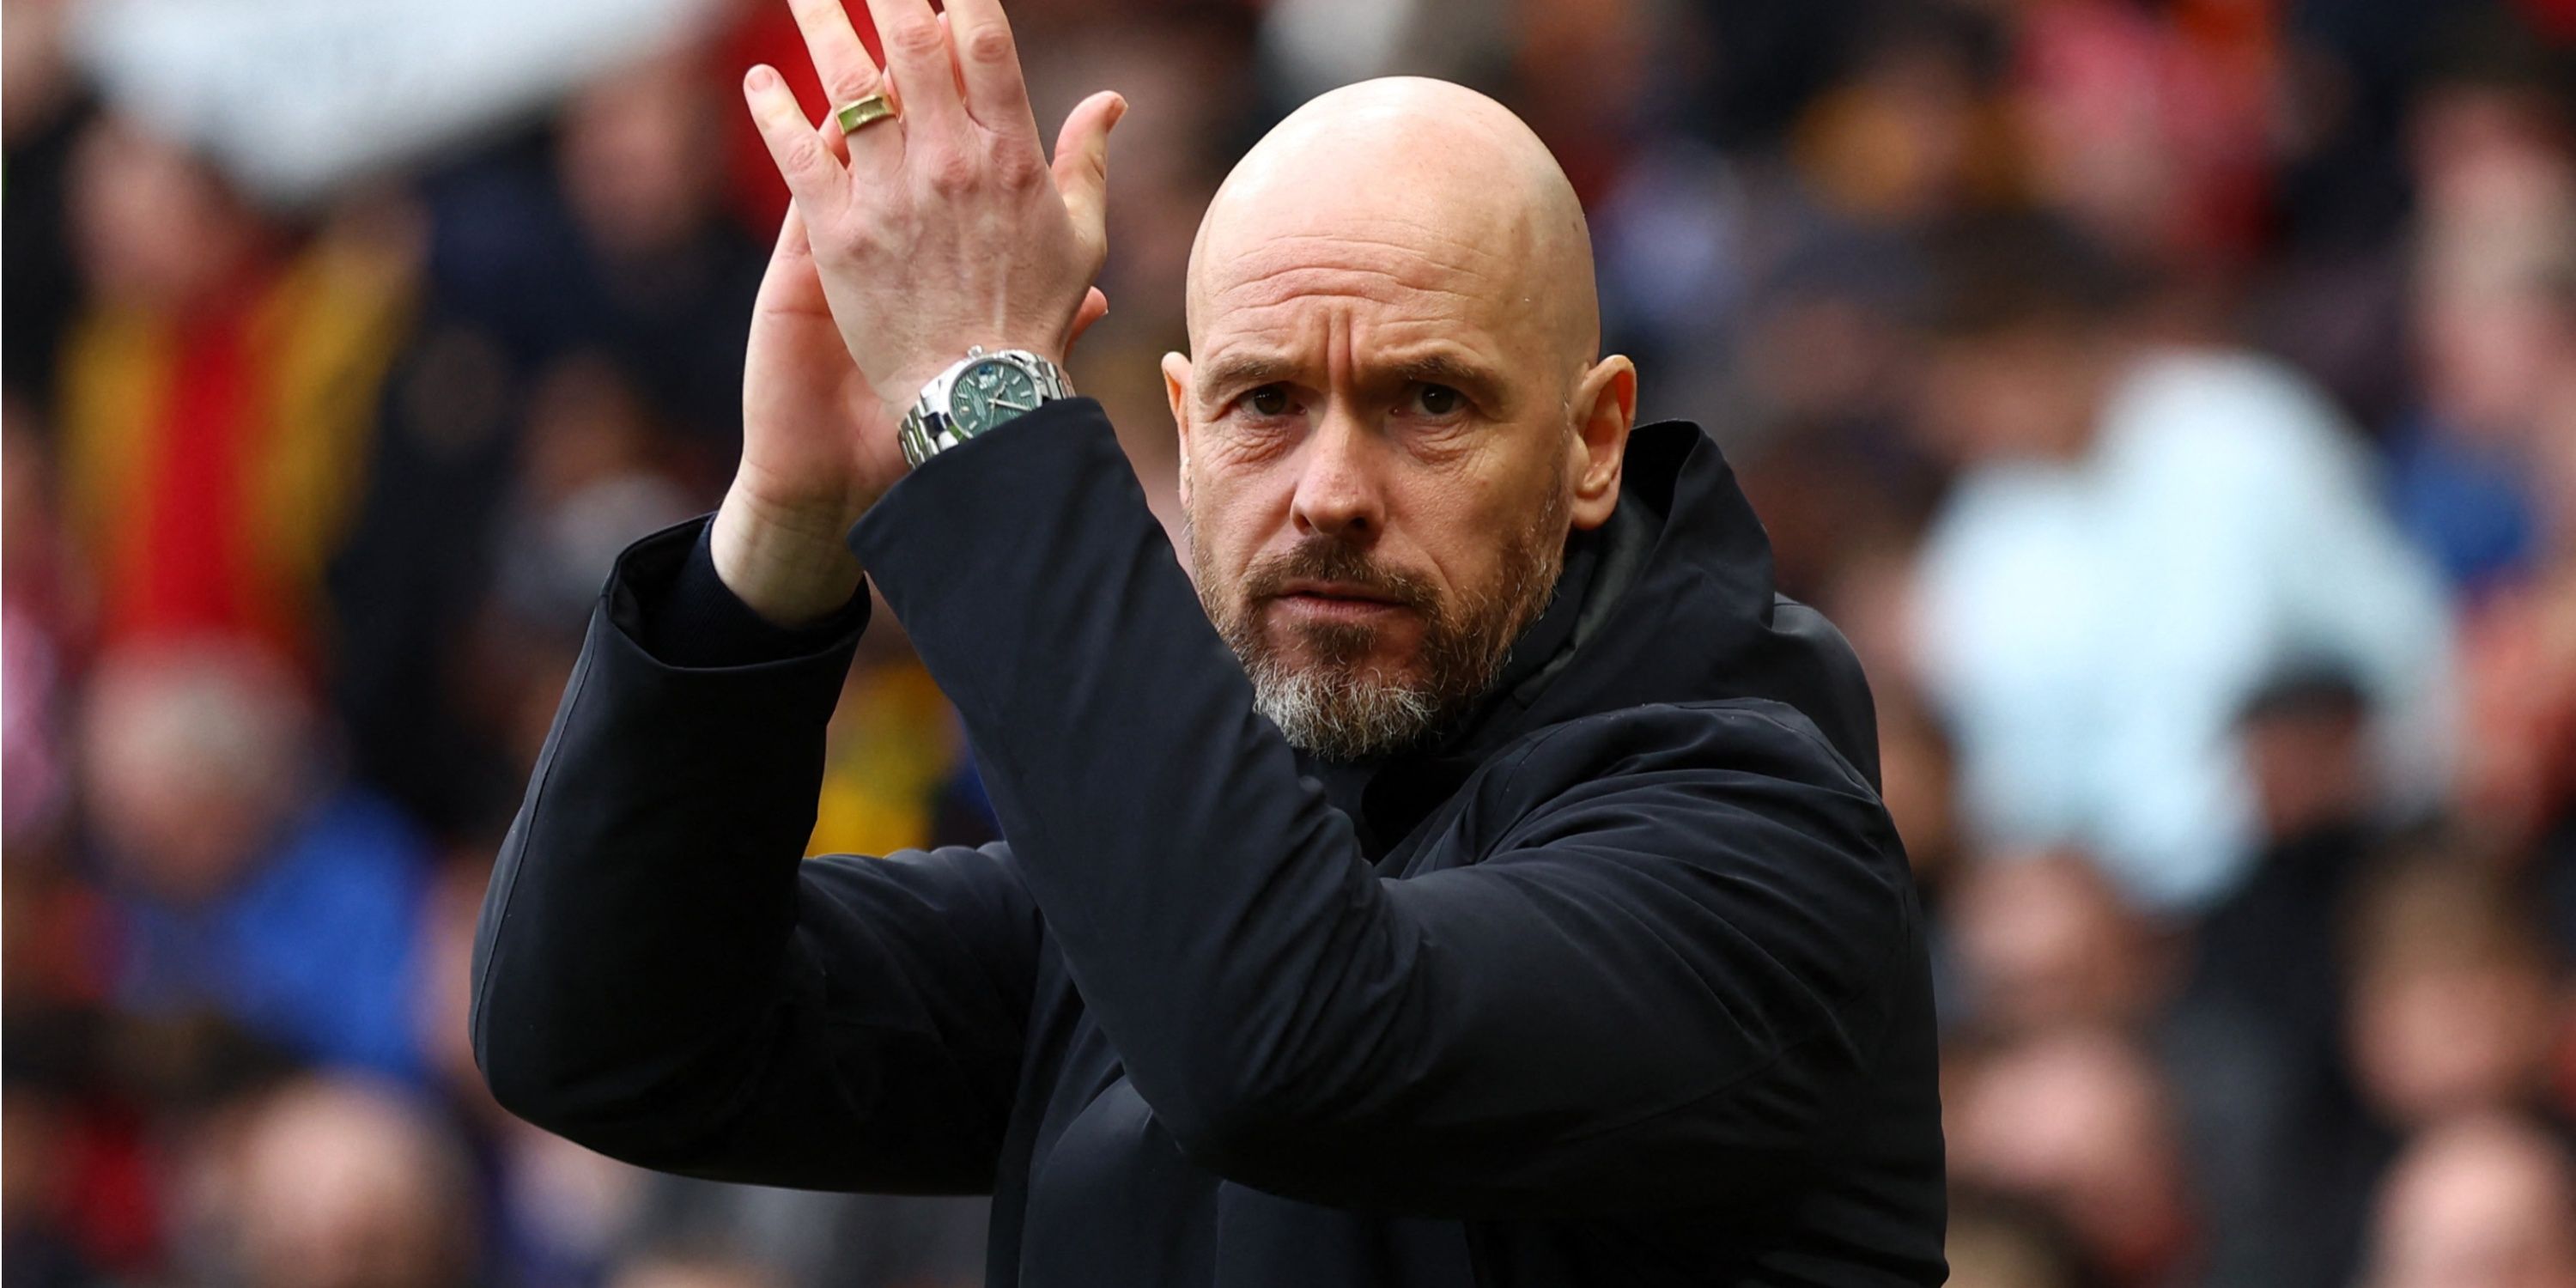 Man United players already know what the future holds for Erik ten Hag at the club.